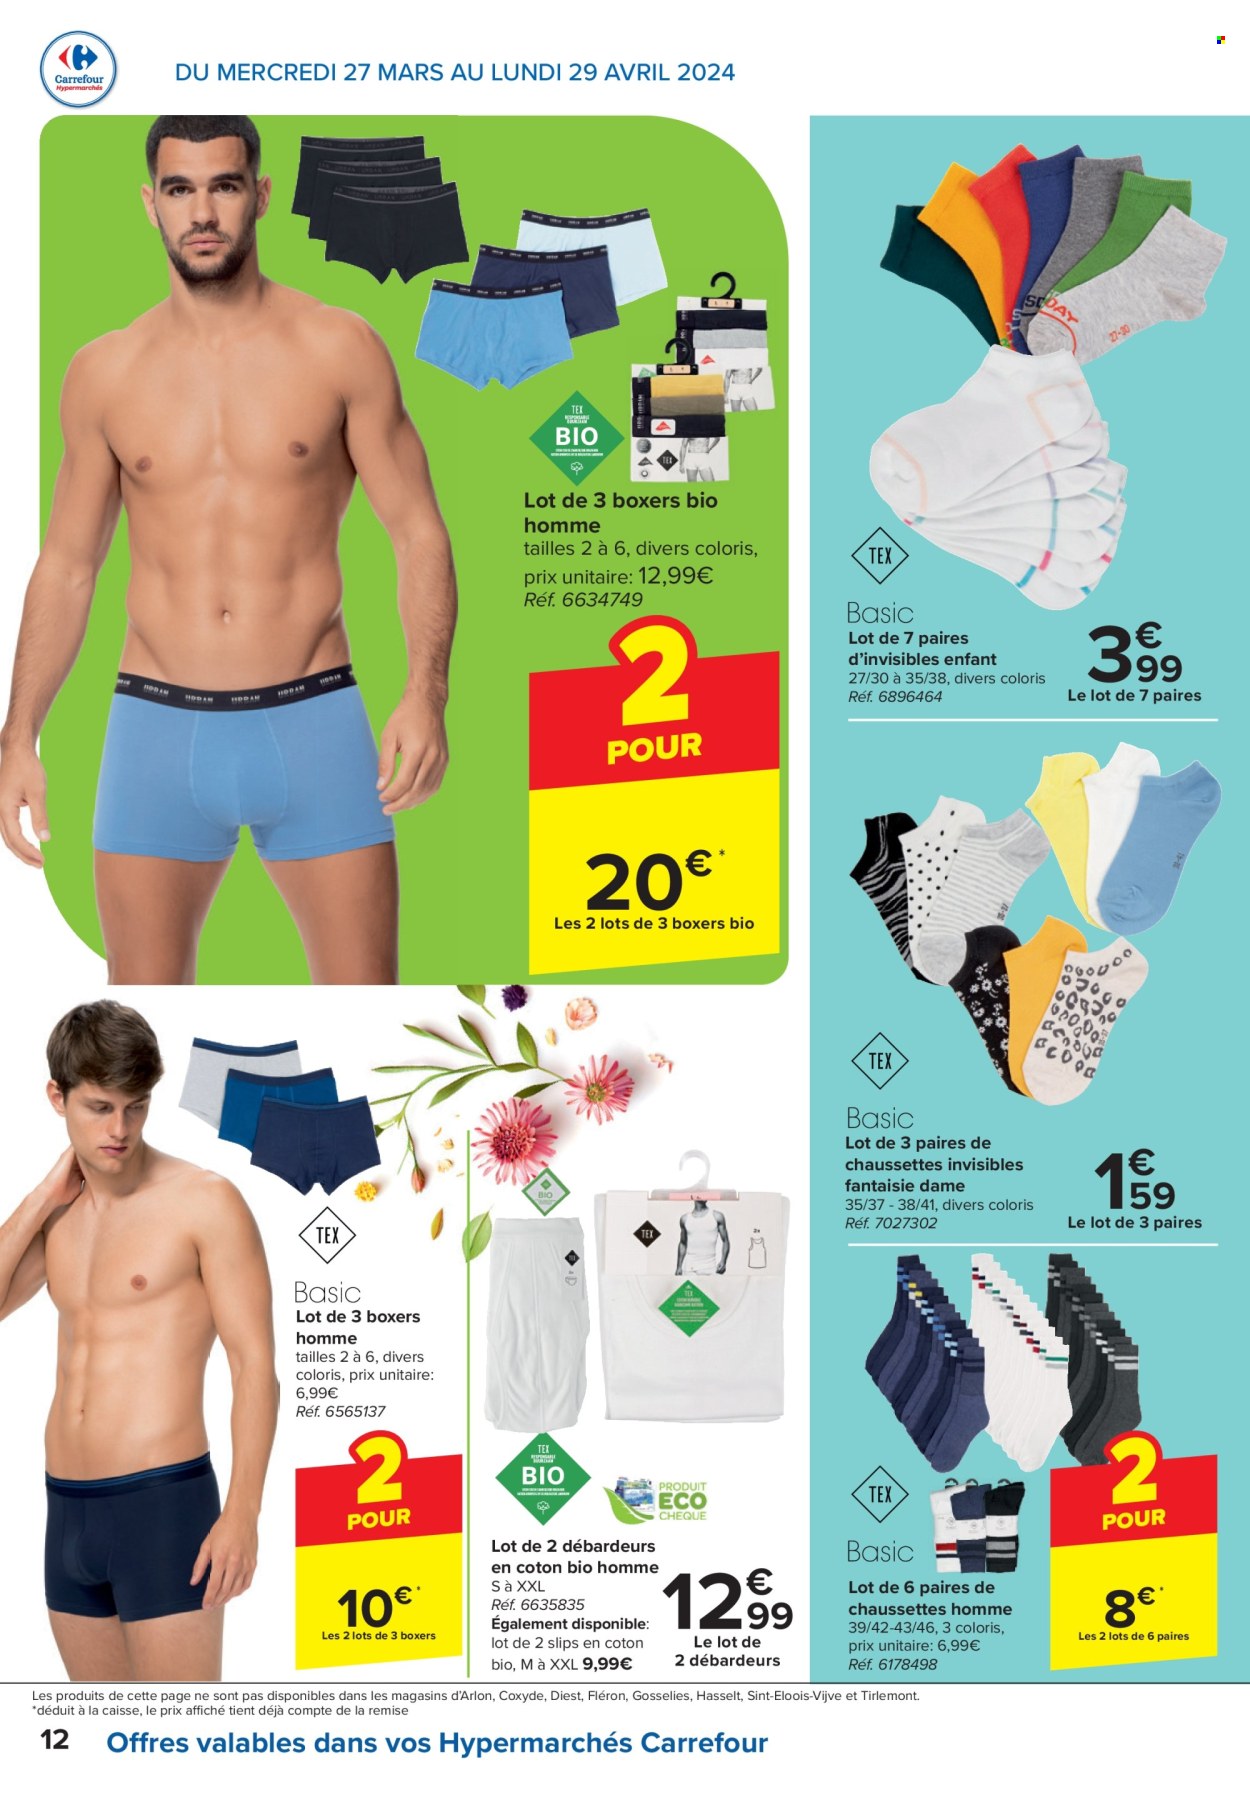 Catalogue Carrefour hypermarkt - 27.3.2024 - 29.4.2024. Page 12.